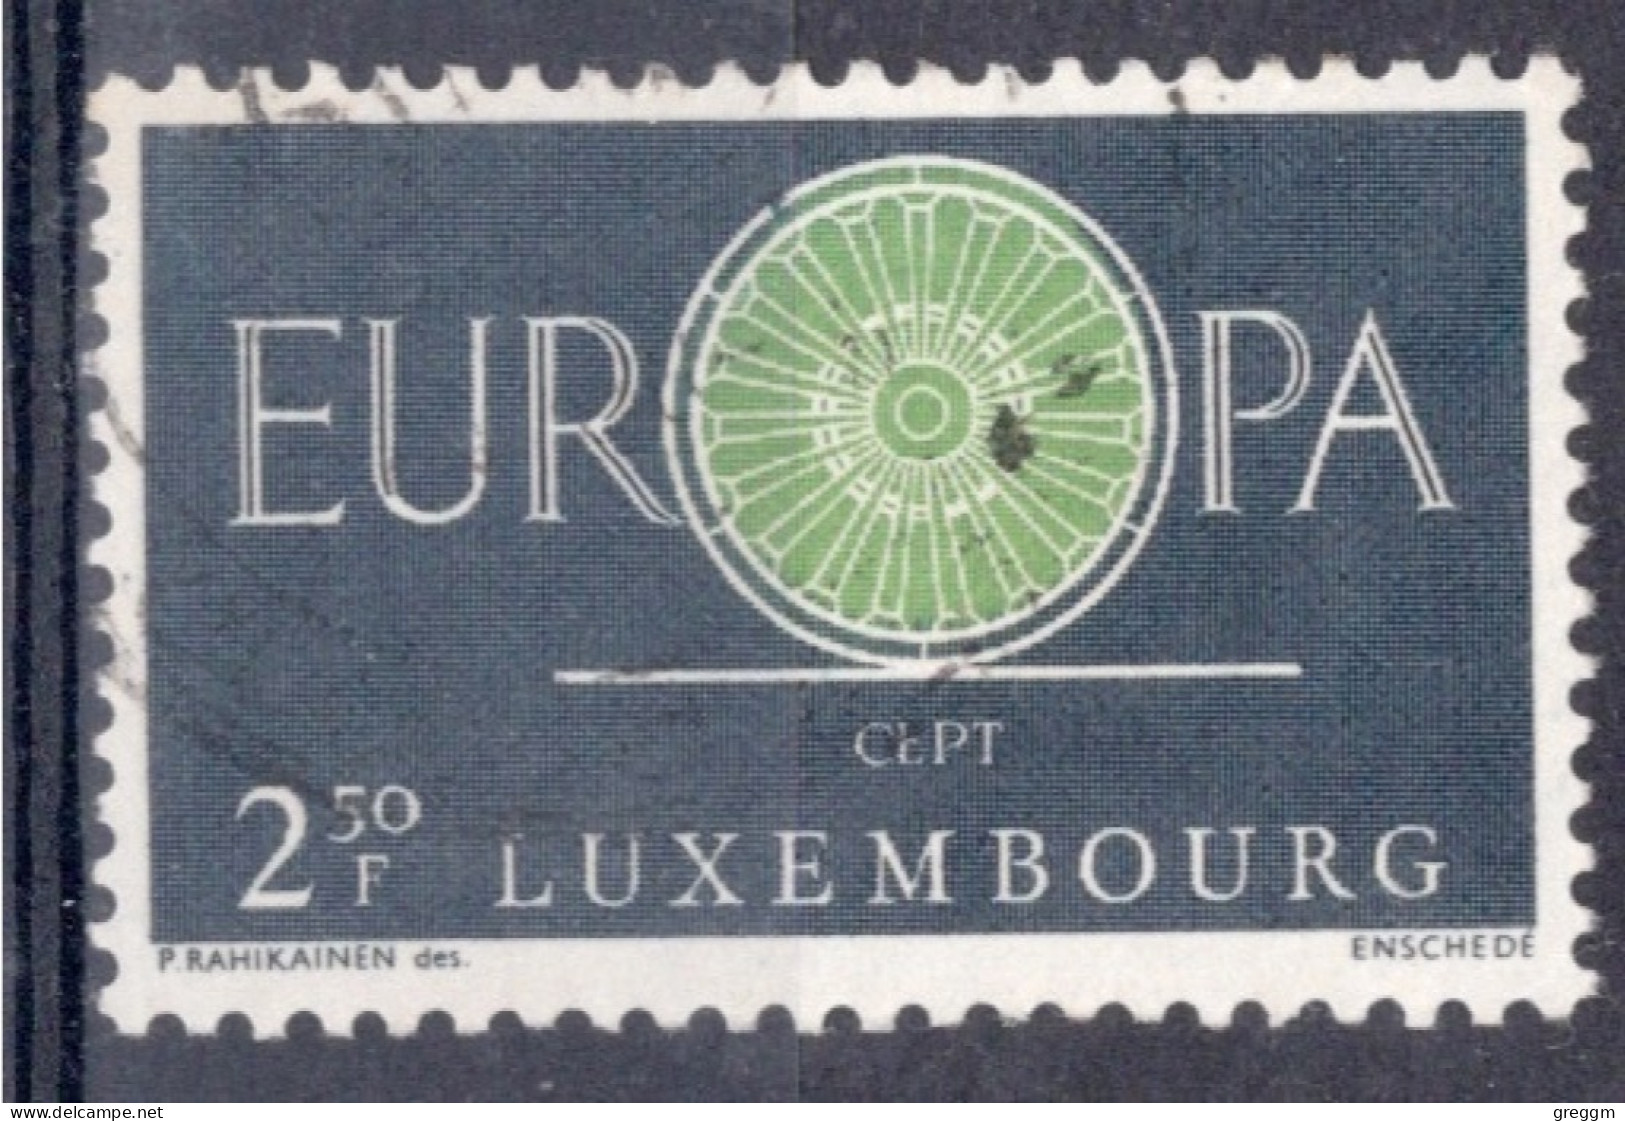 Luxembourg 1960  Single Stamp Issued To Celebrate EUROPA In Fine Used - Oblitérés